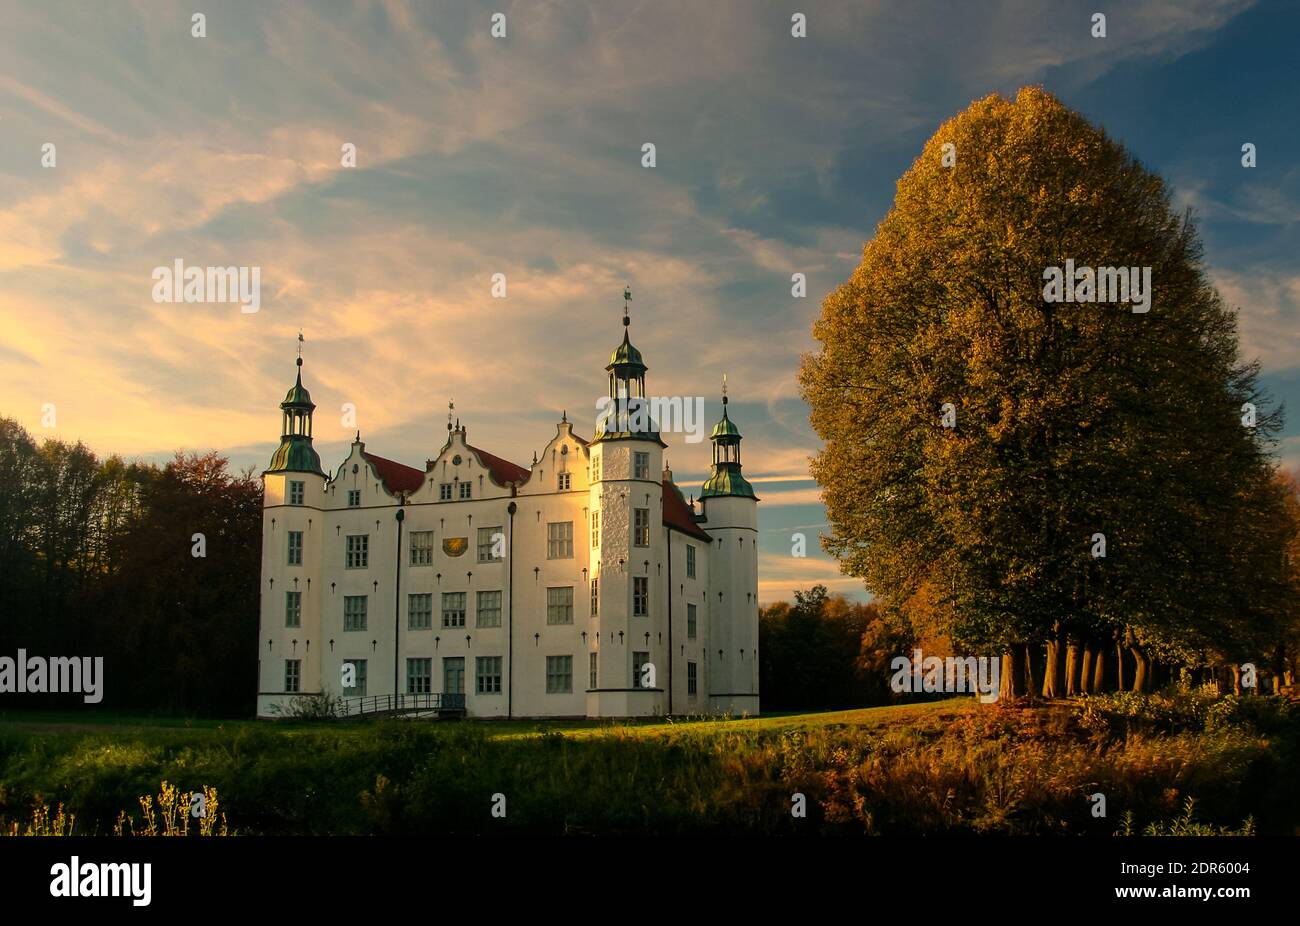 Schloss Ahrensburg (Ahrensburg Palace) is a former Herrenhaus (mansion) and is today referred to as a castle. It is located in Ahrensburg/ Germany. Stock Photo